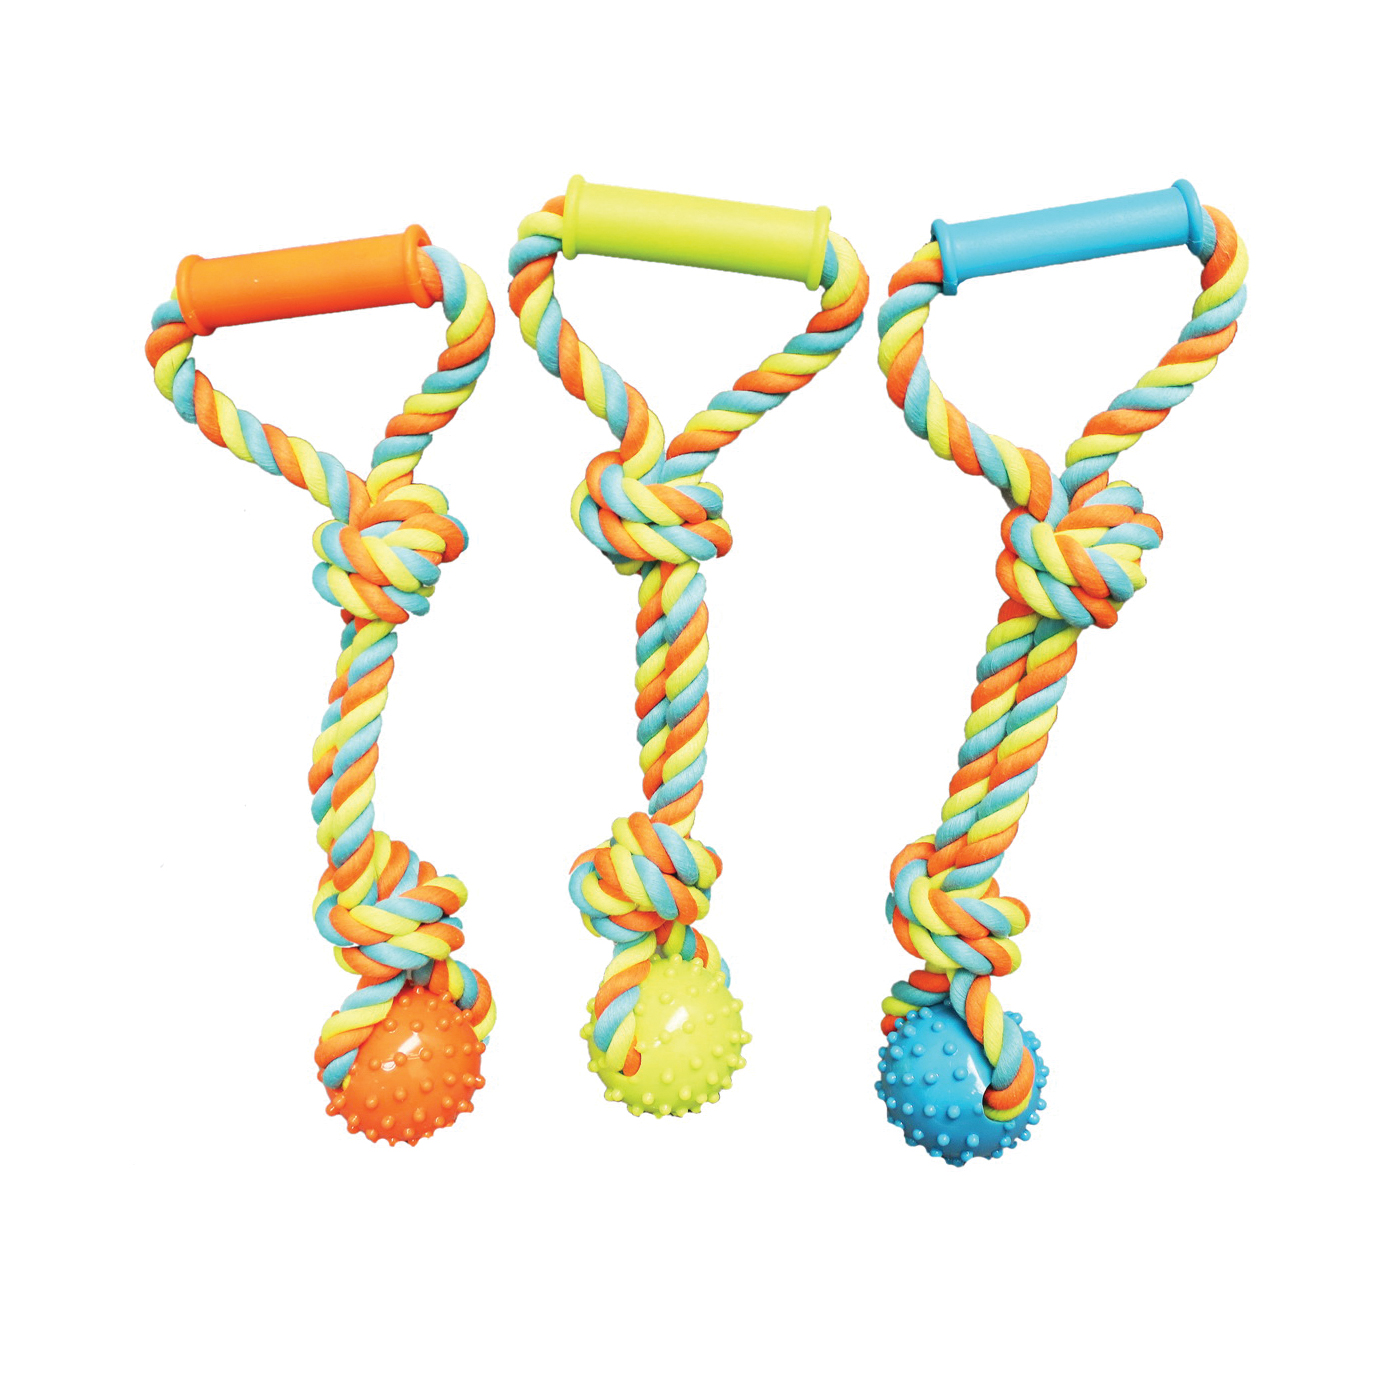 WB15520 Dog Toy, Tug Spike Ball, Thermoplastic Rubber